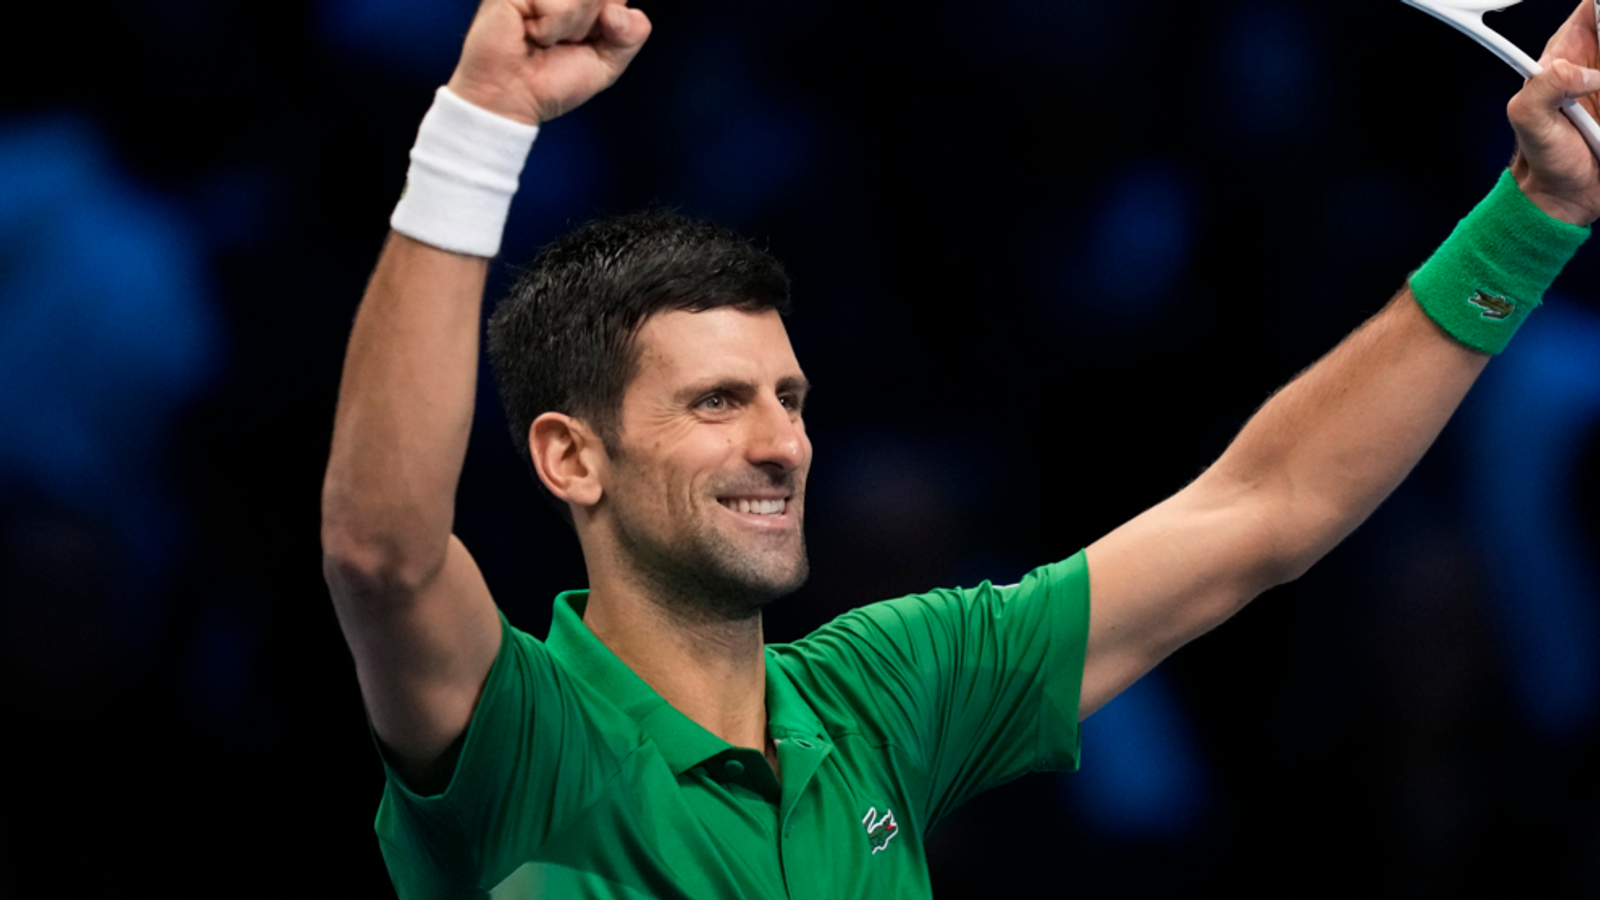 ATP Finals Novak Djokovic to face Casper Ruud in final after beating Taylor Fritz in straight sets Tennis News Sky Sports